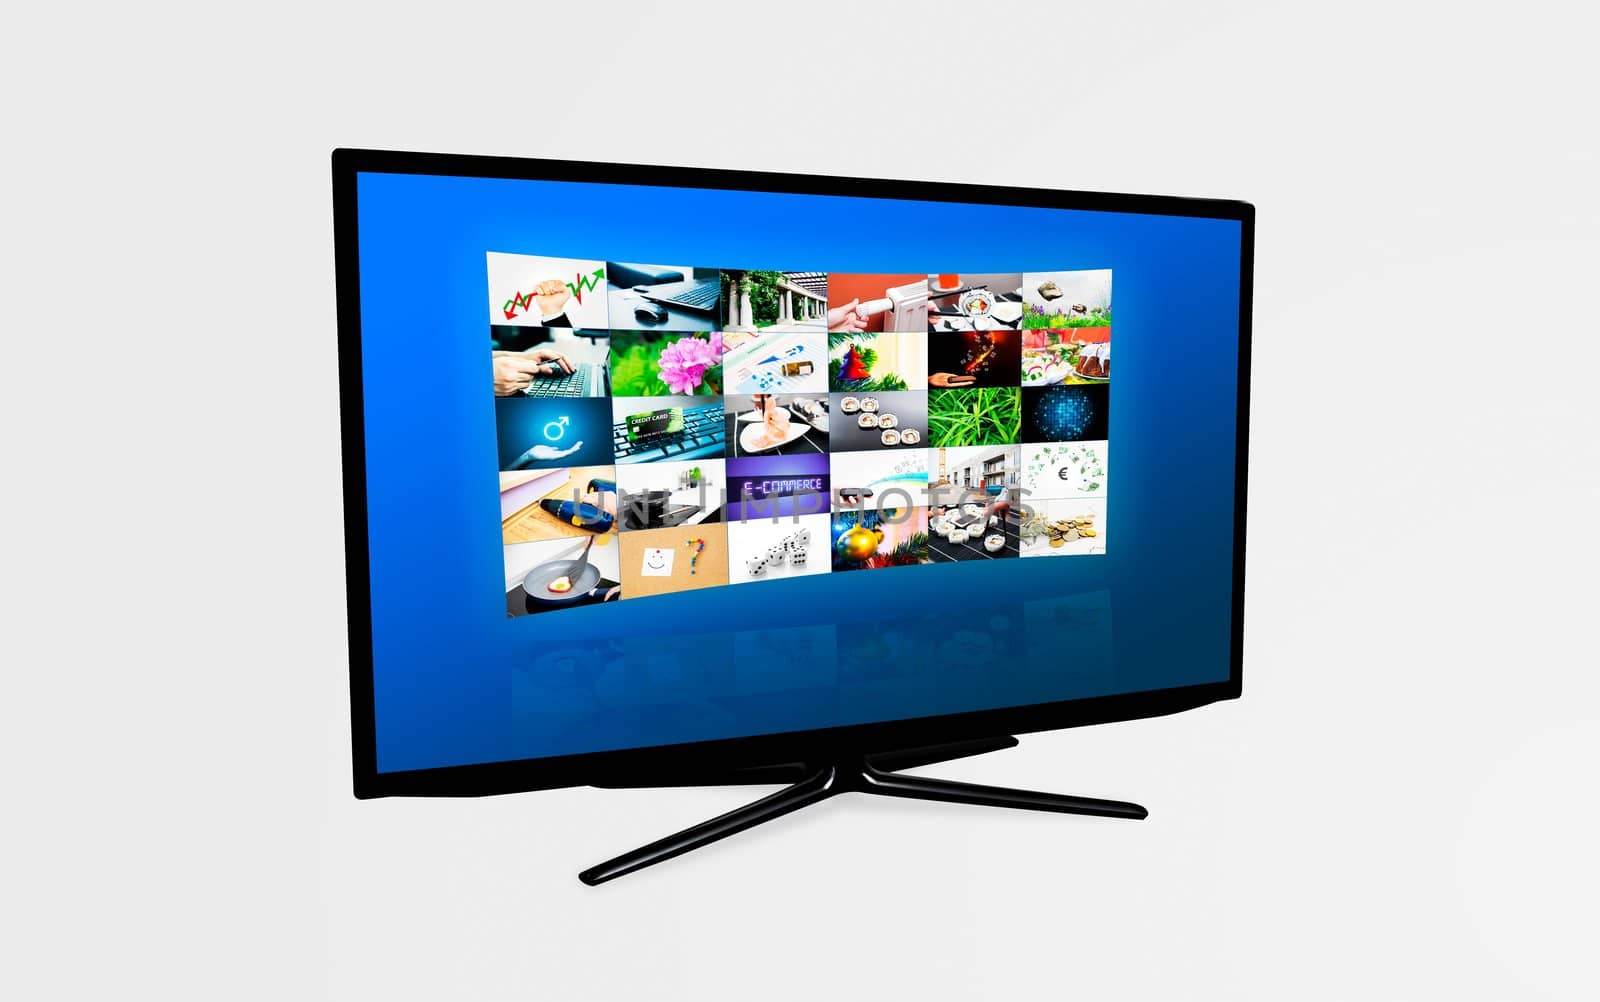 Widescreen high definition TV screen with video gallery. Televis by simpson33